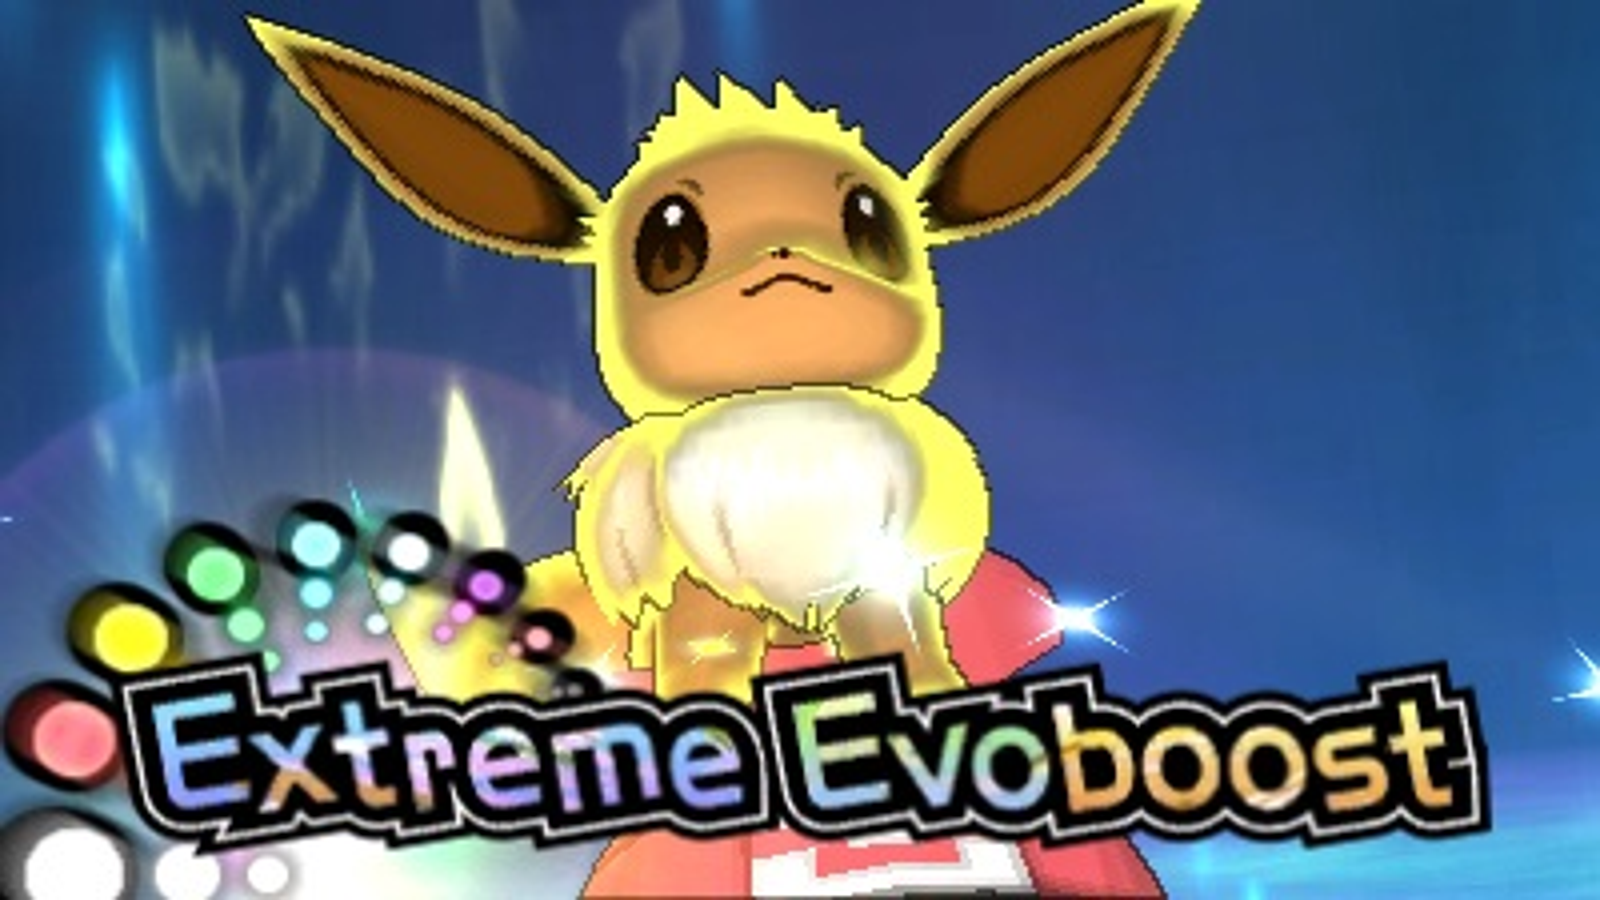 HOW TO GET Eevee in Pokémon Ultra Sun and Ultra Moon 